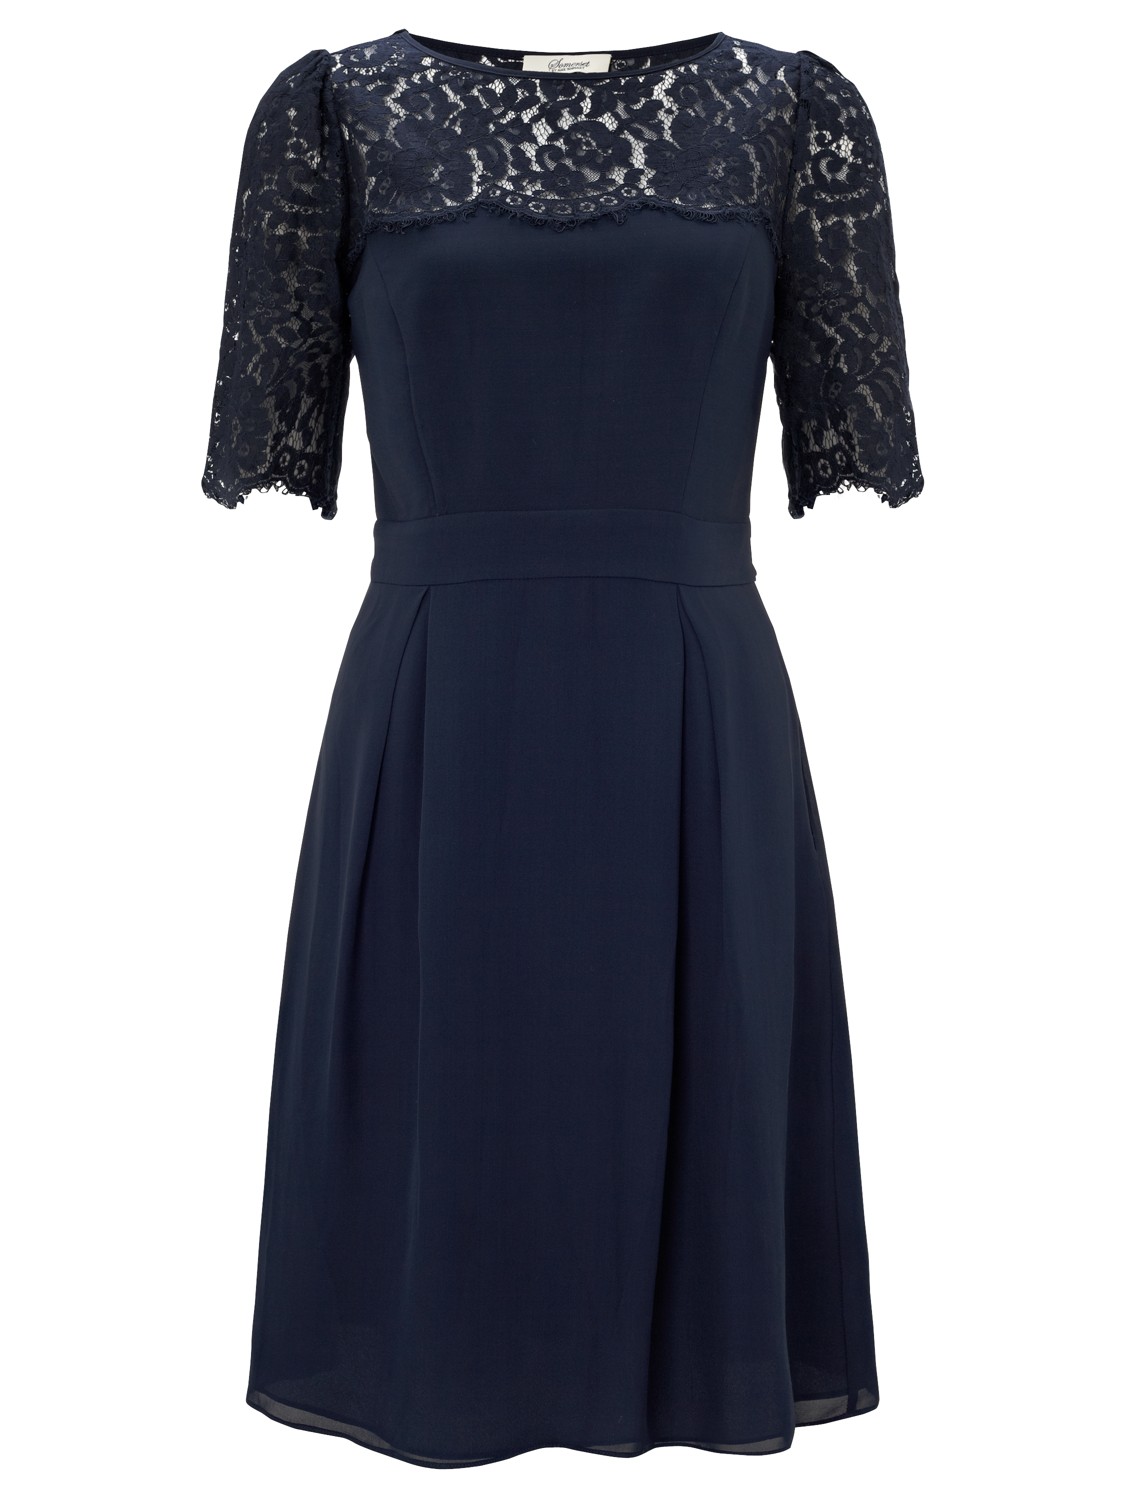 Somerset By Alice Temperley Lace Bodice Dress in Blue (Midnight) | Lyst